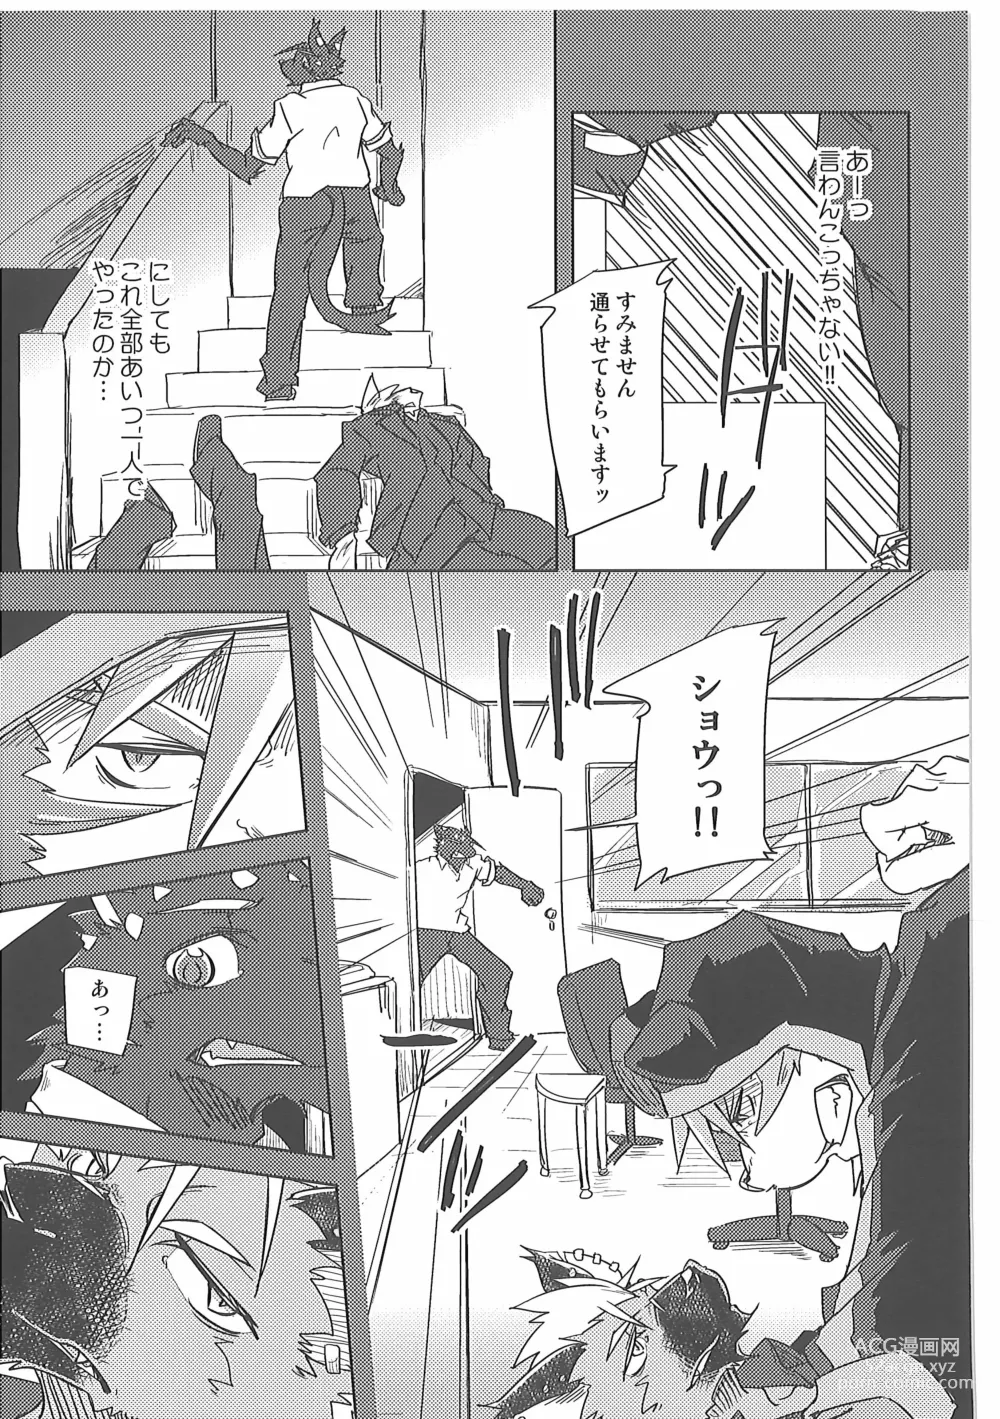 Page 9 of doujinshi Water under The Bridge 2